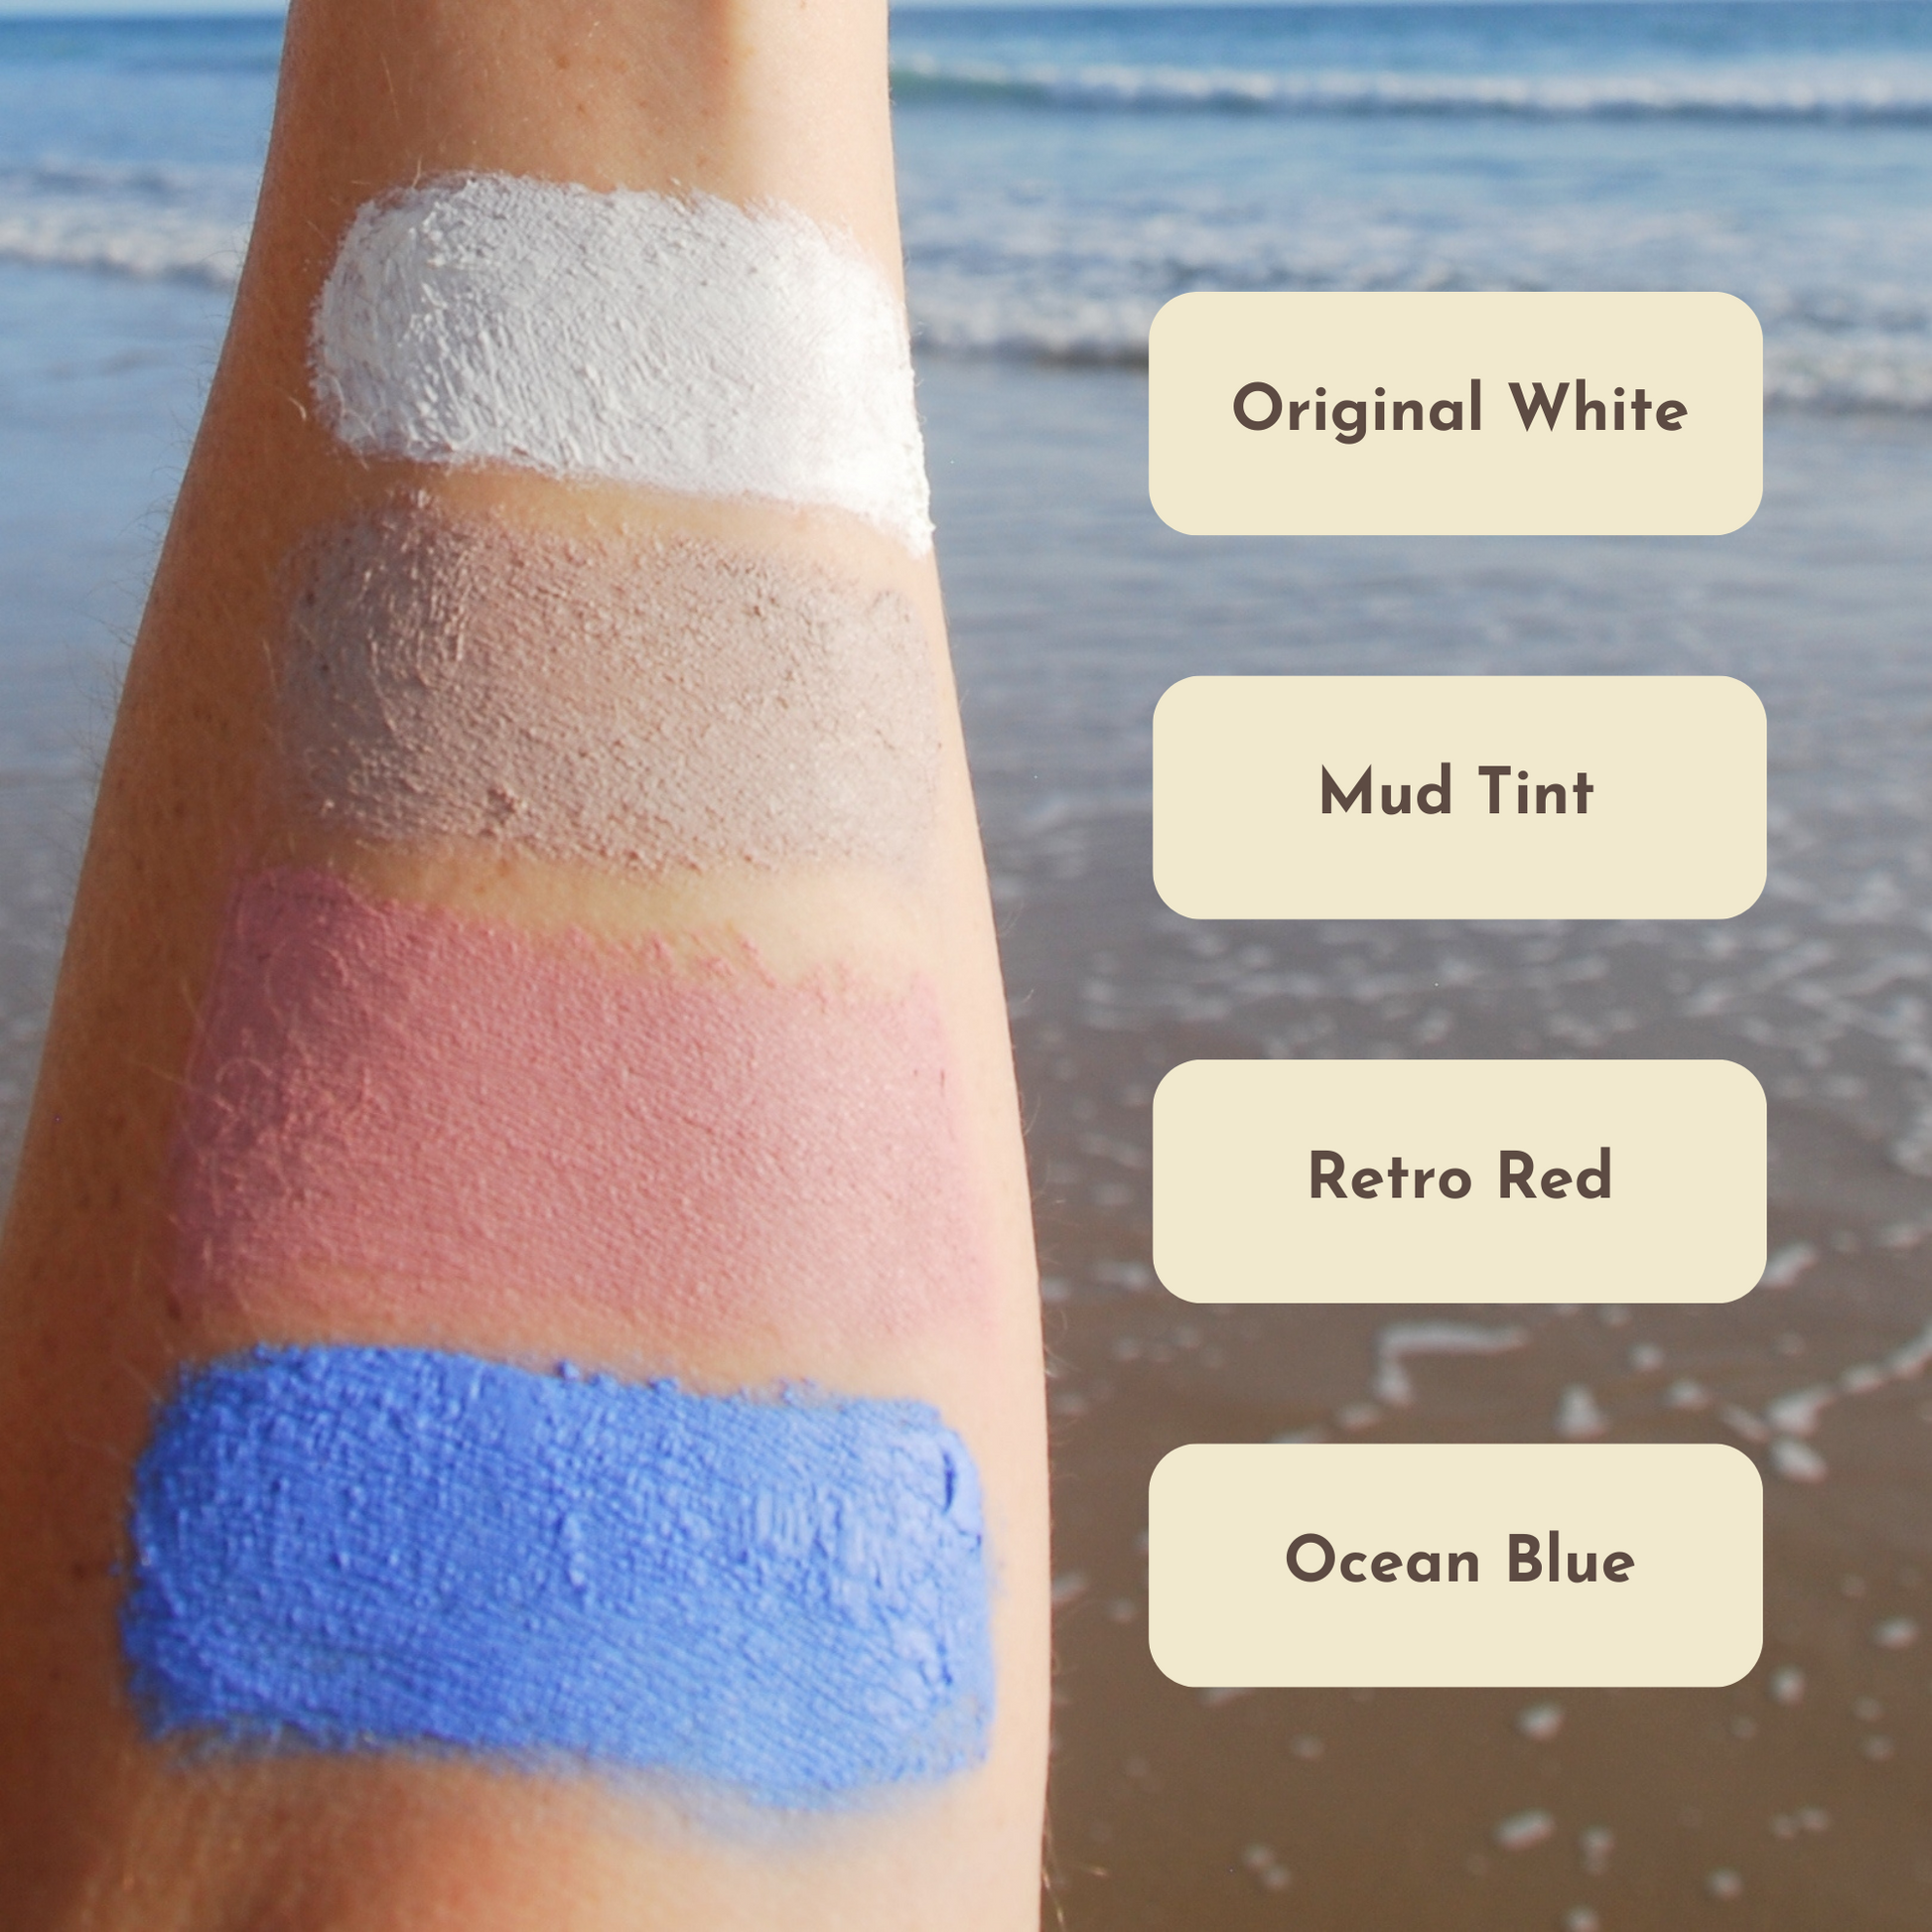 Natural Zinc Oxide sunscreen in white made by Suntribe.